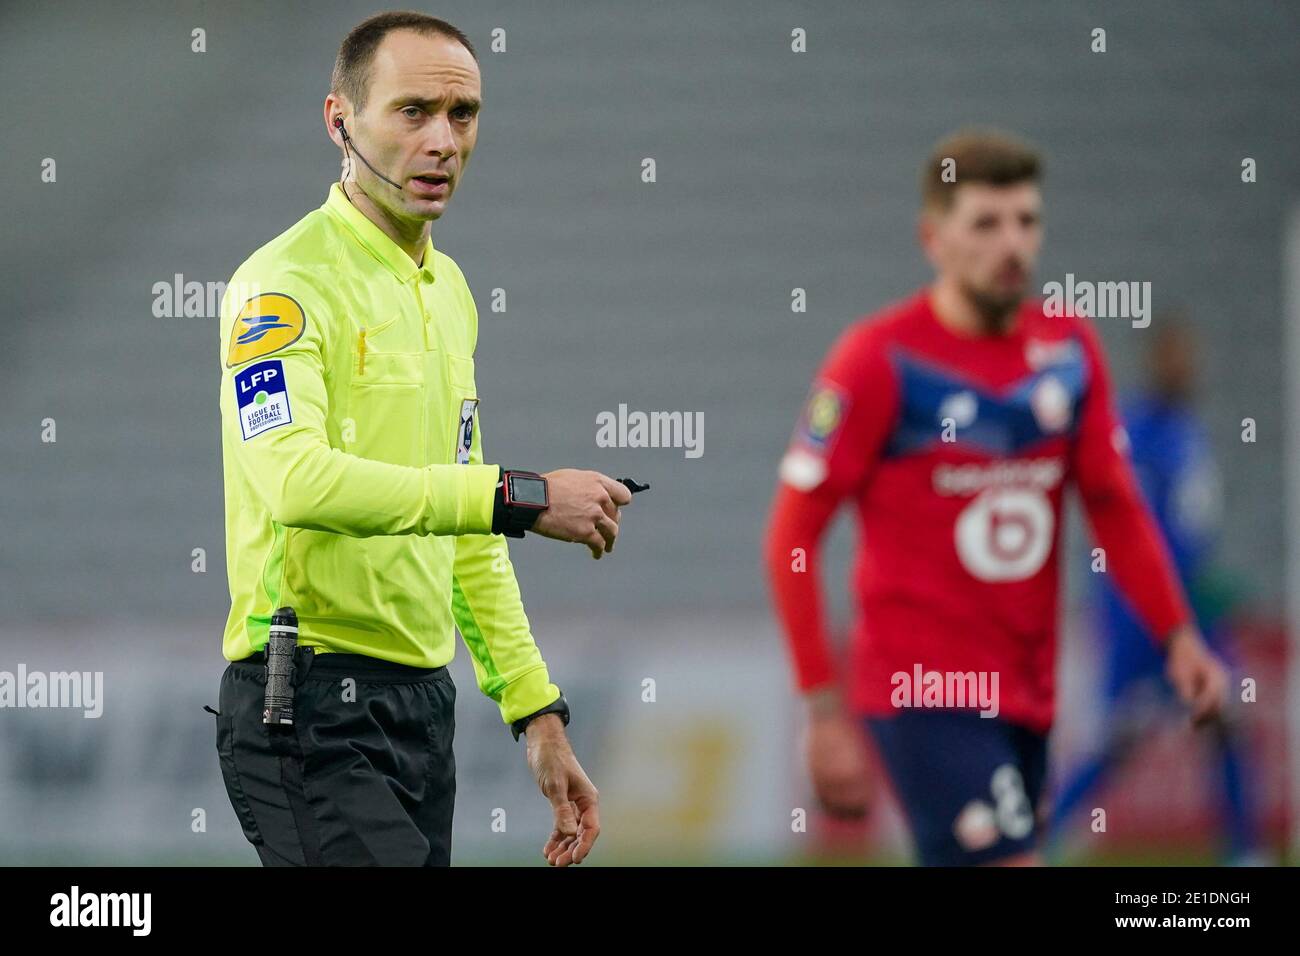 LILLE, FRANCE - JANUARY 6: Referee Thomas Leonard during the Ligue 1 match between Lille OSC and Angers SCO at Stade Pierre Mauroy on January 6, 2021 in Lille, France (Photo by Jeroen Meuwsen/BSR Agency/Alamy Live News)*** Local Caption *** Thomas Leonard Stock Photo